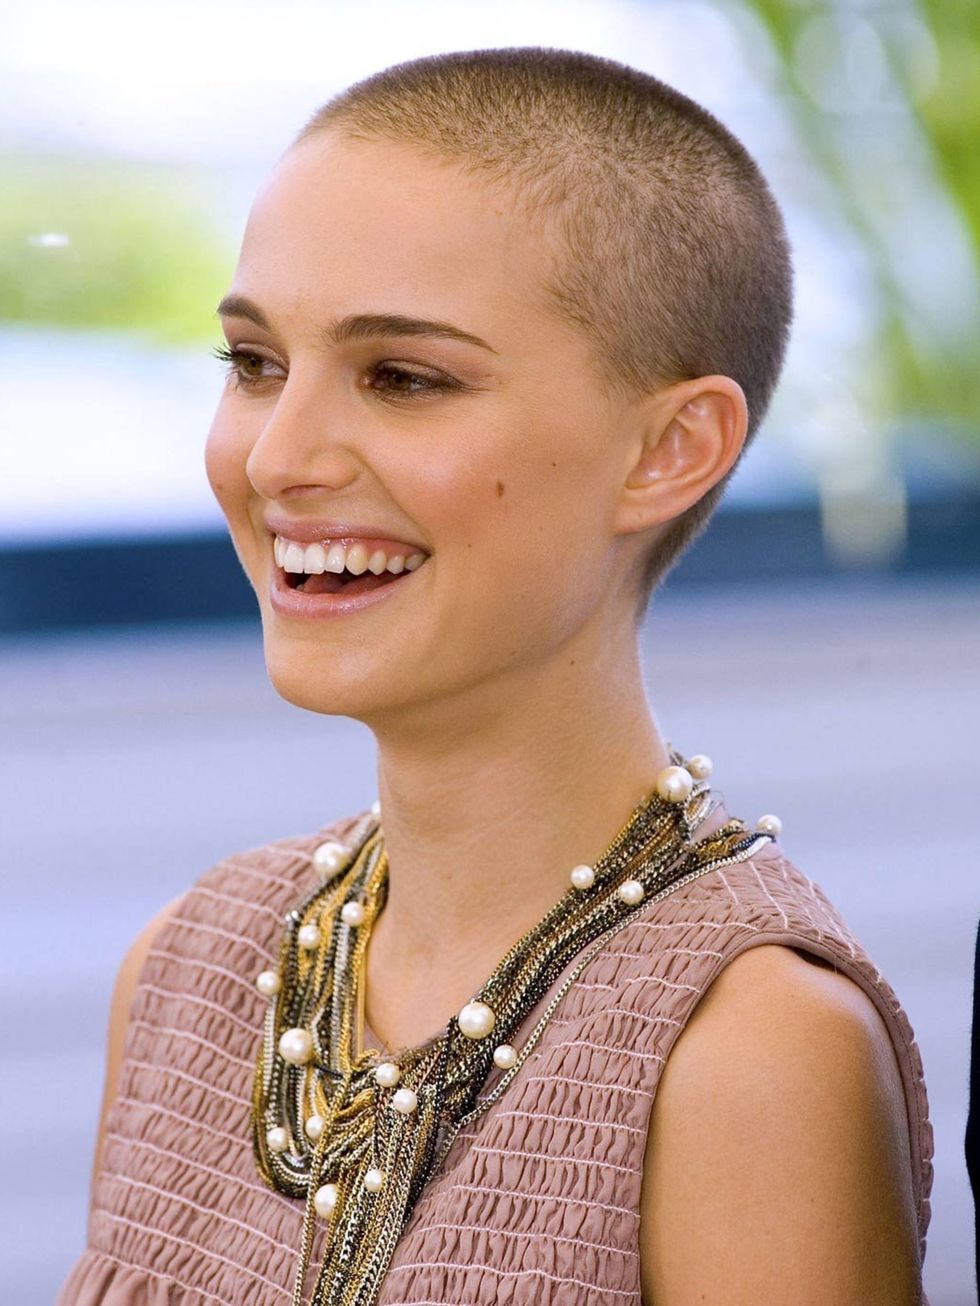 <p><a href="http://www.elleuk.com/star-style/celebrity-style-files/natalie-portman">Natalie Portman</a> remained elfin and beautiful after shaving her head for a part in 2005s V For Vendetta.</p>